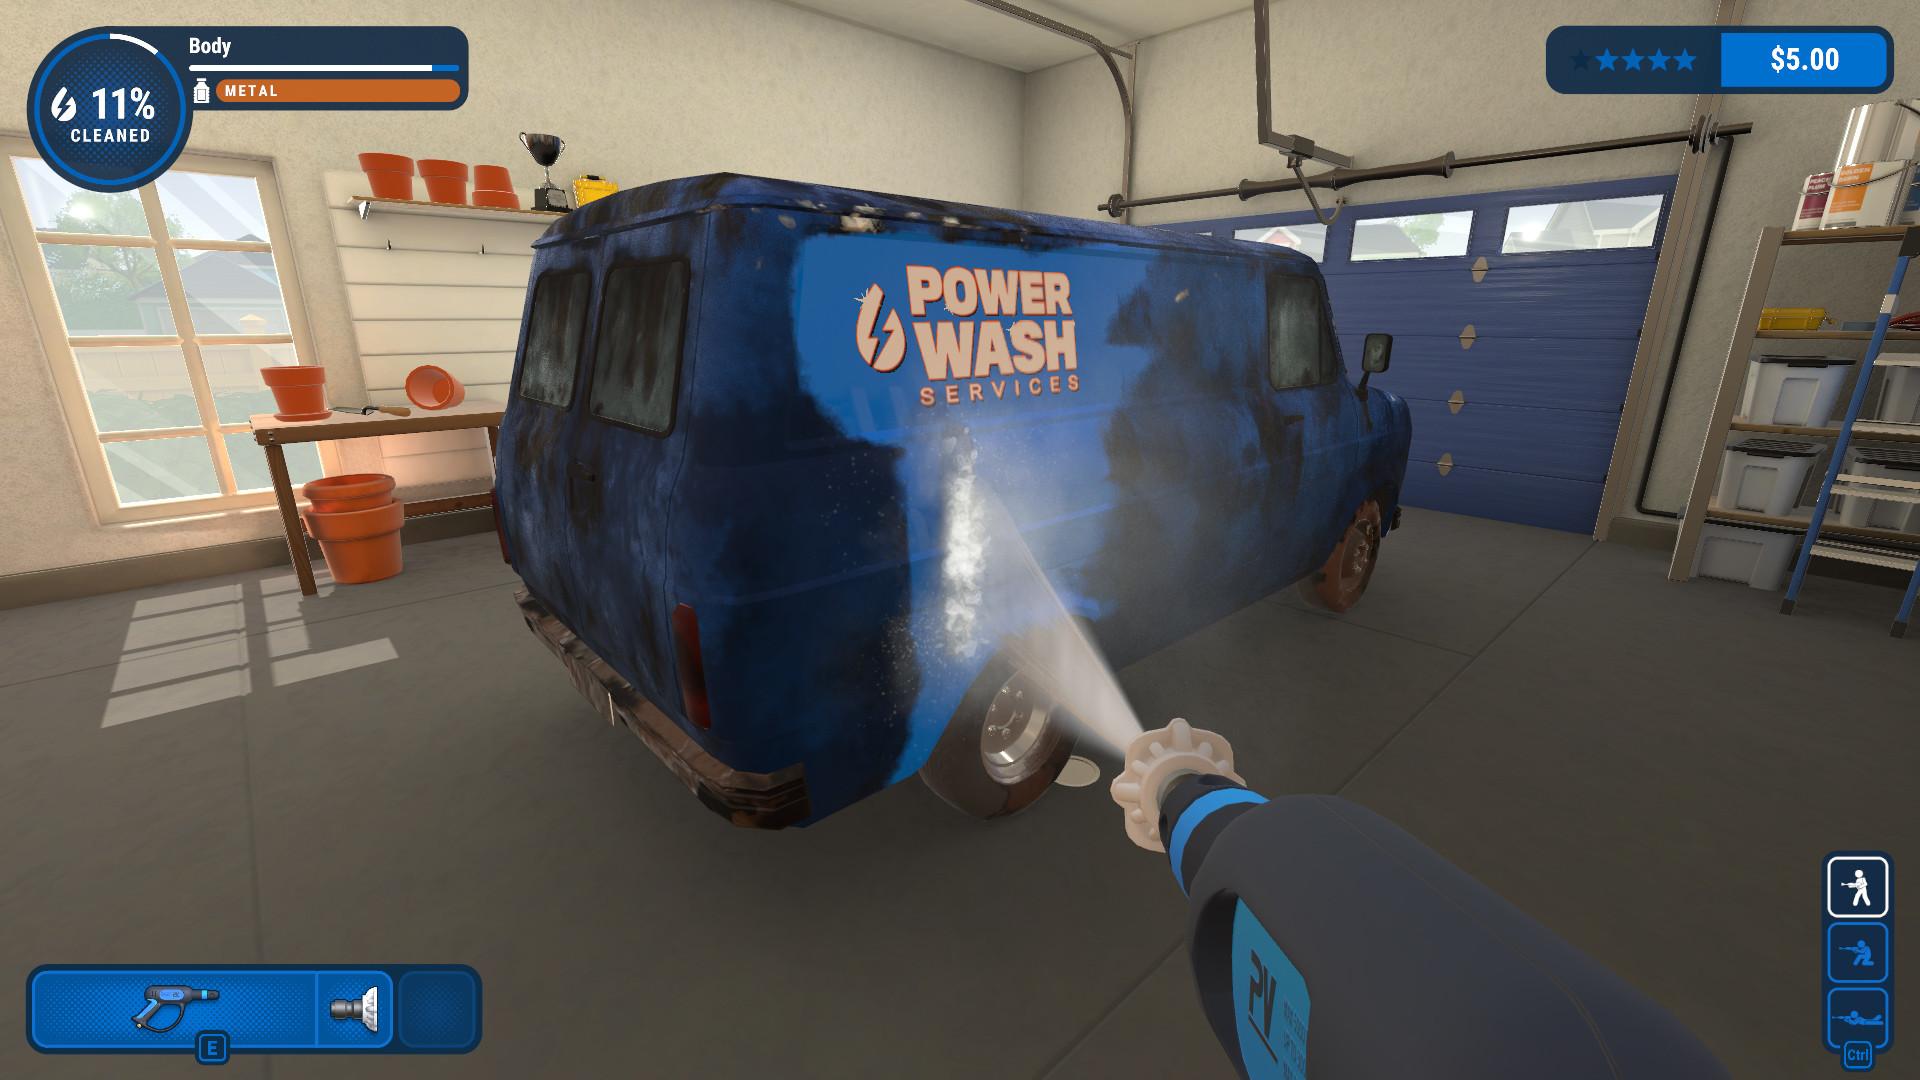 Powerwash Simulator is Available Now on PlayStation and Nintendo